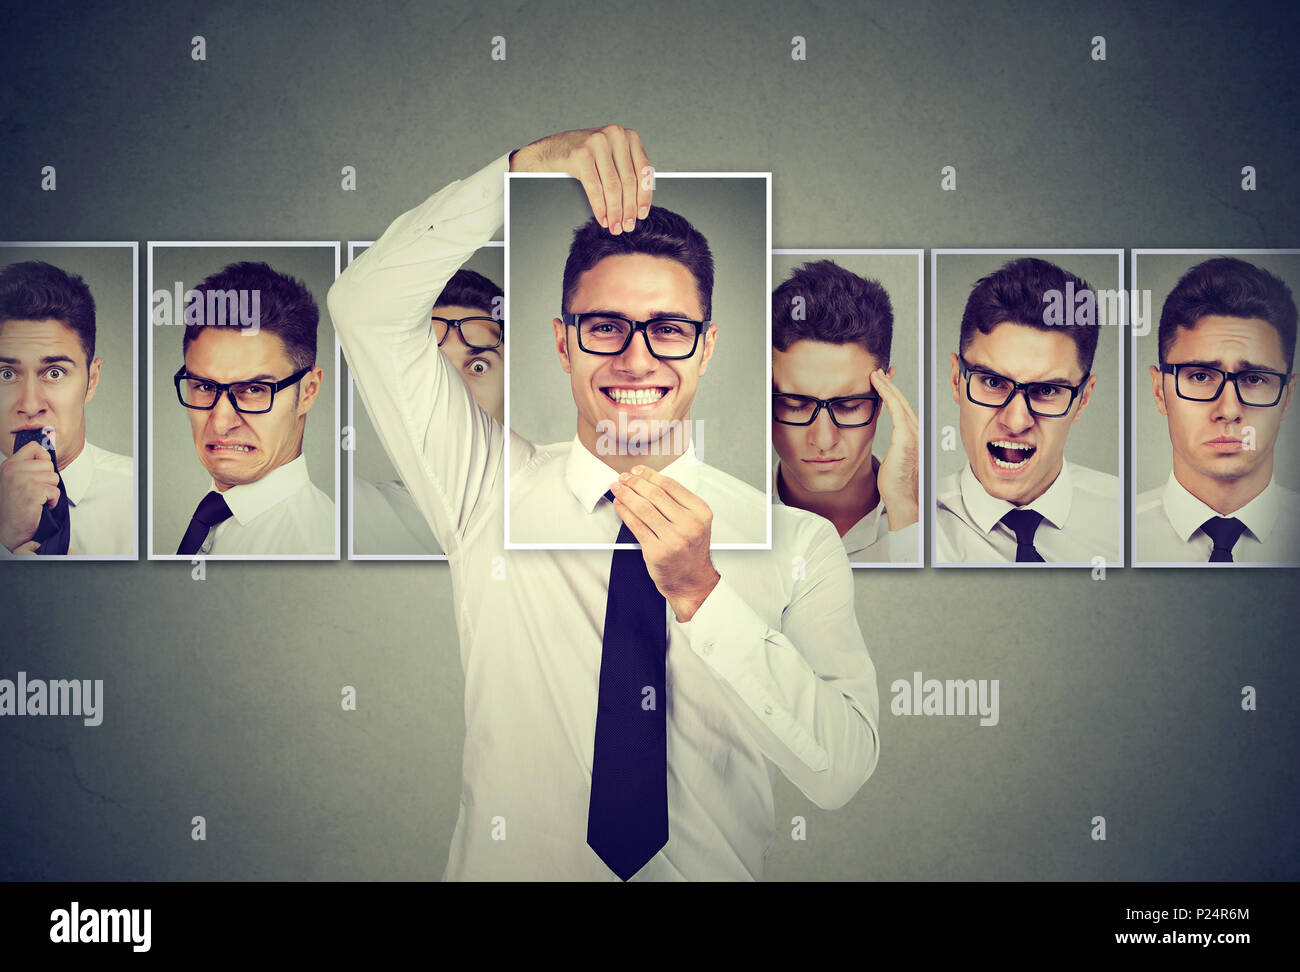 Masked man in glasses expressing different emotions Stock Photo